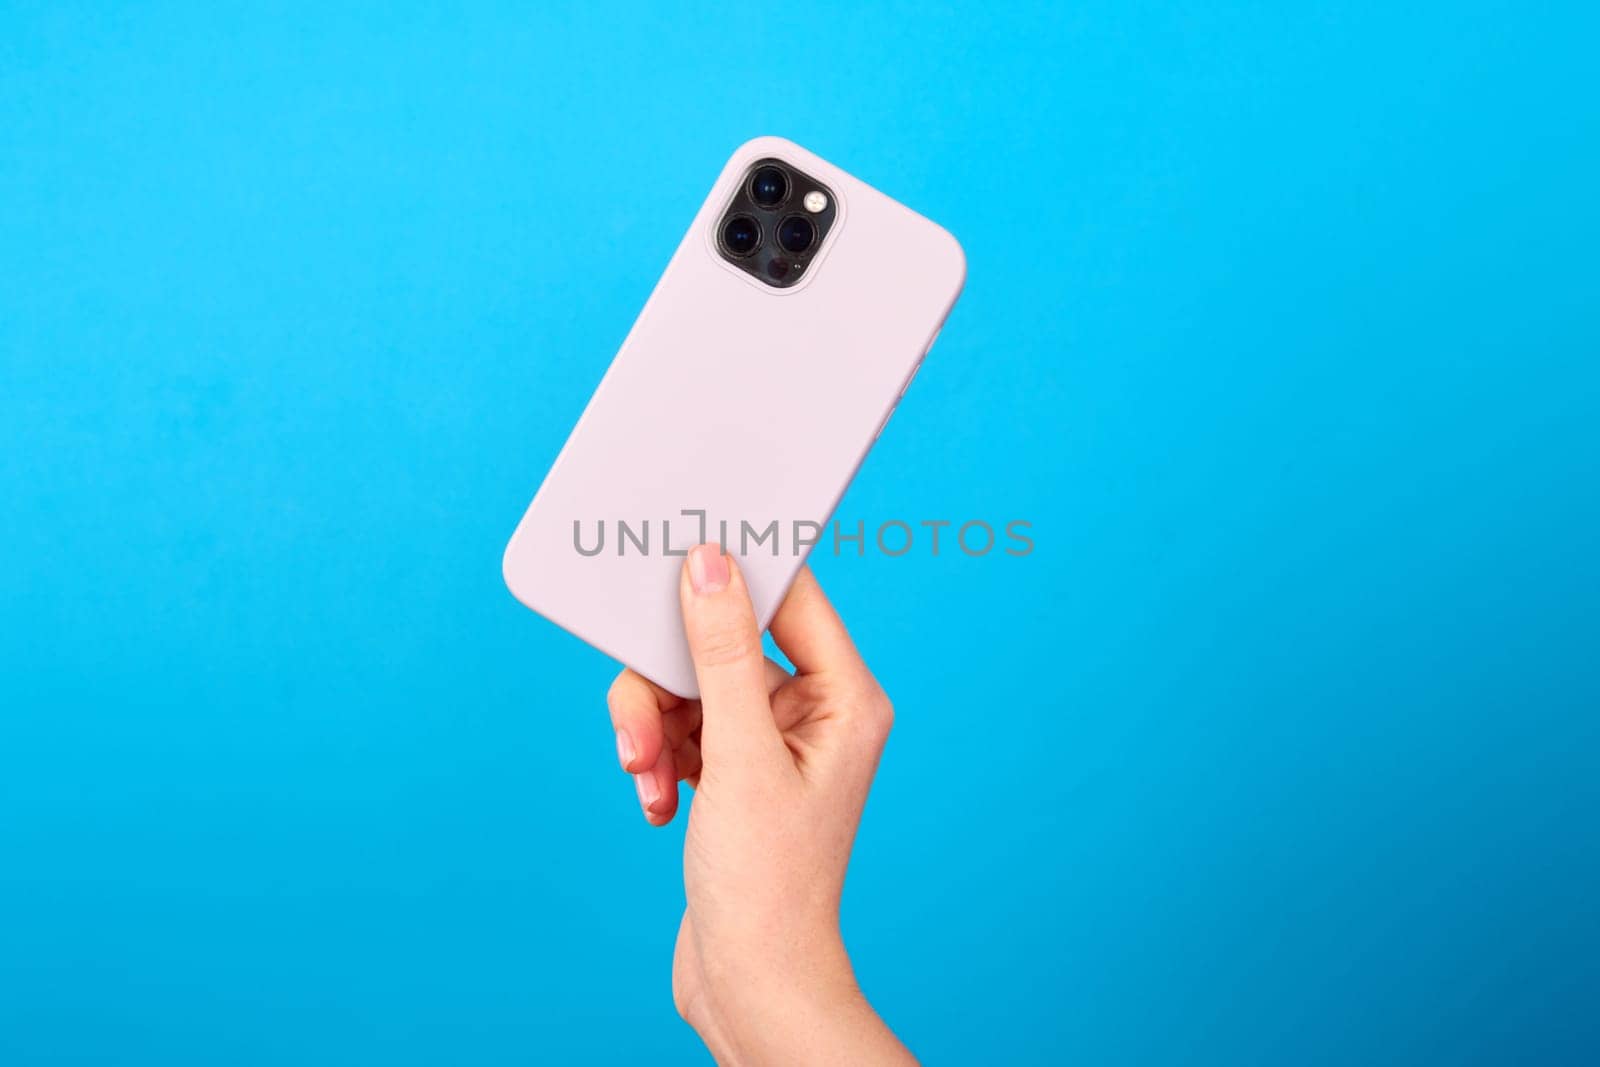 Hand of unrecognizable person showing back side of modern silver smartphone against blue backdrop in studio